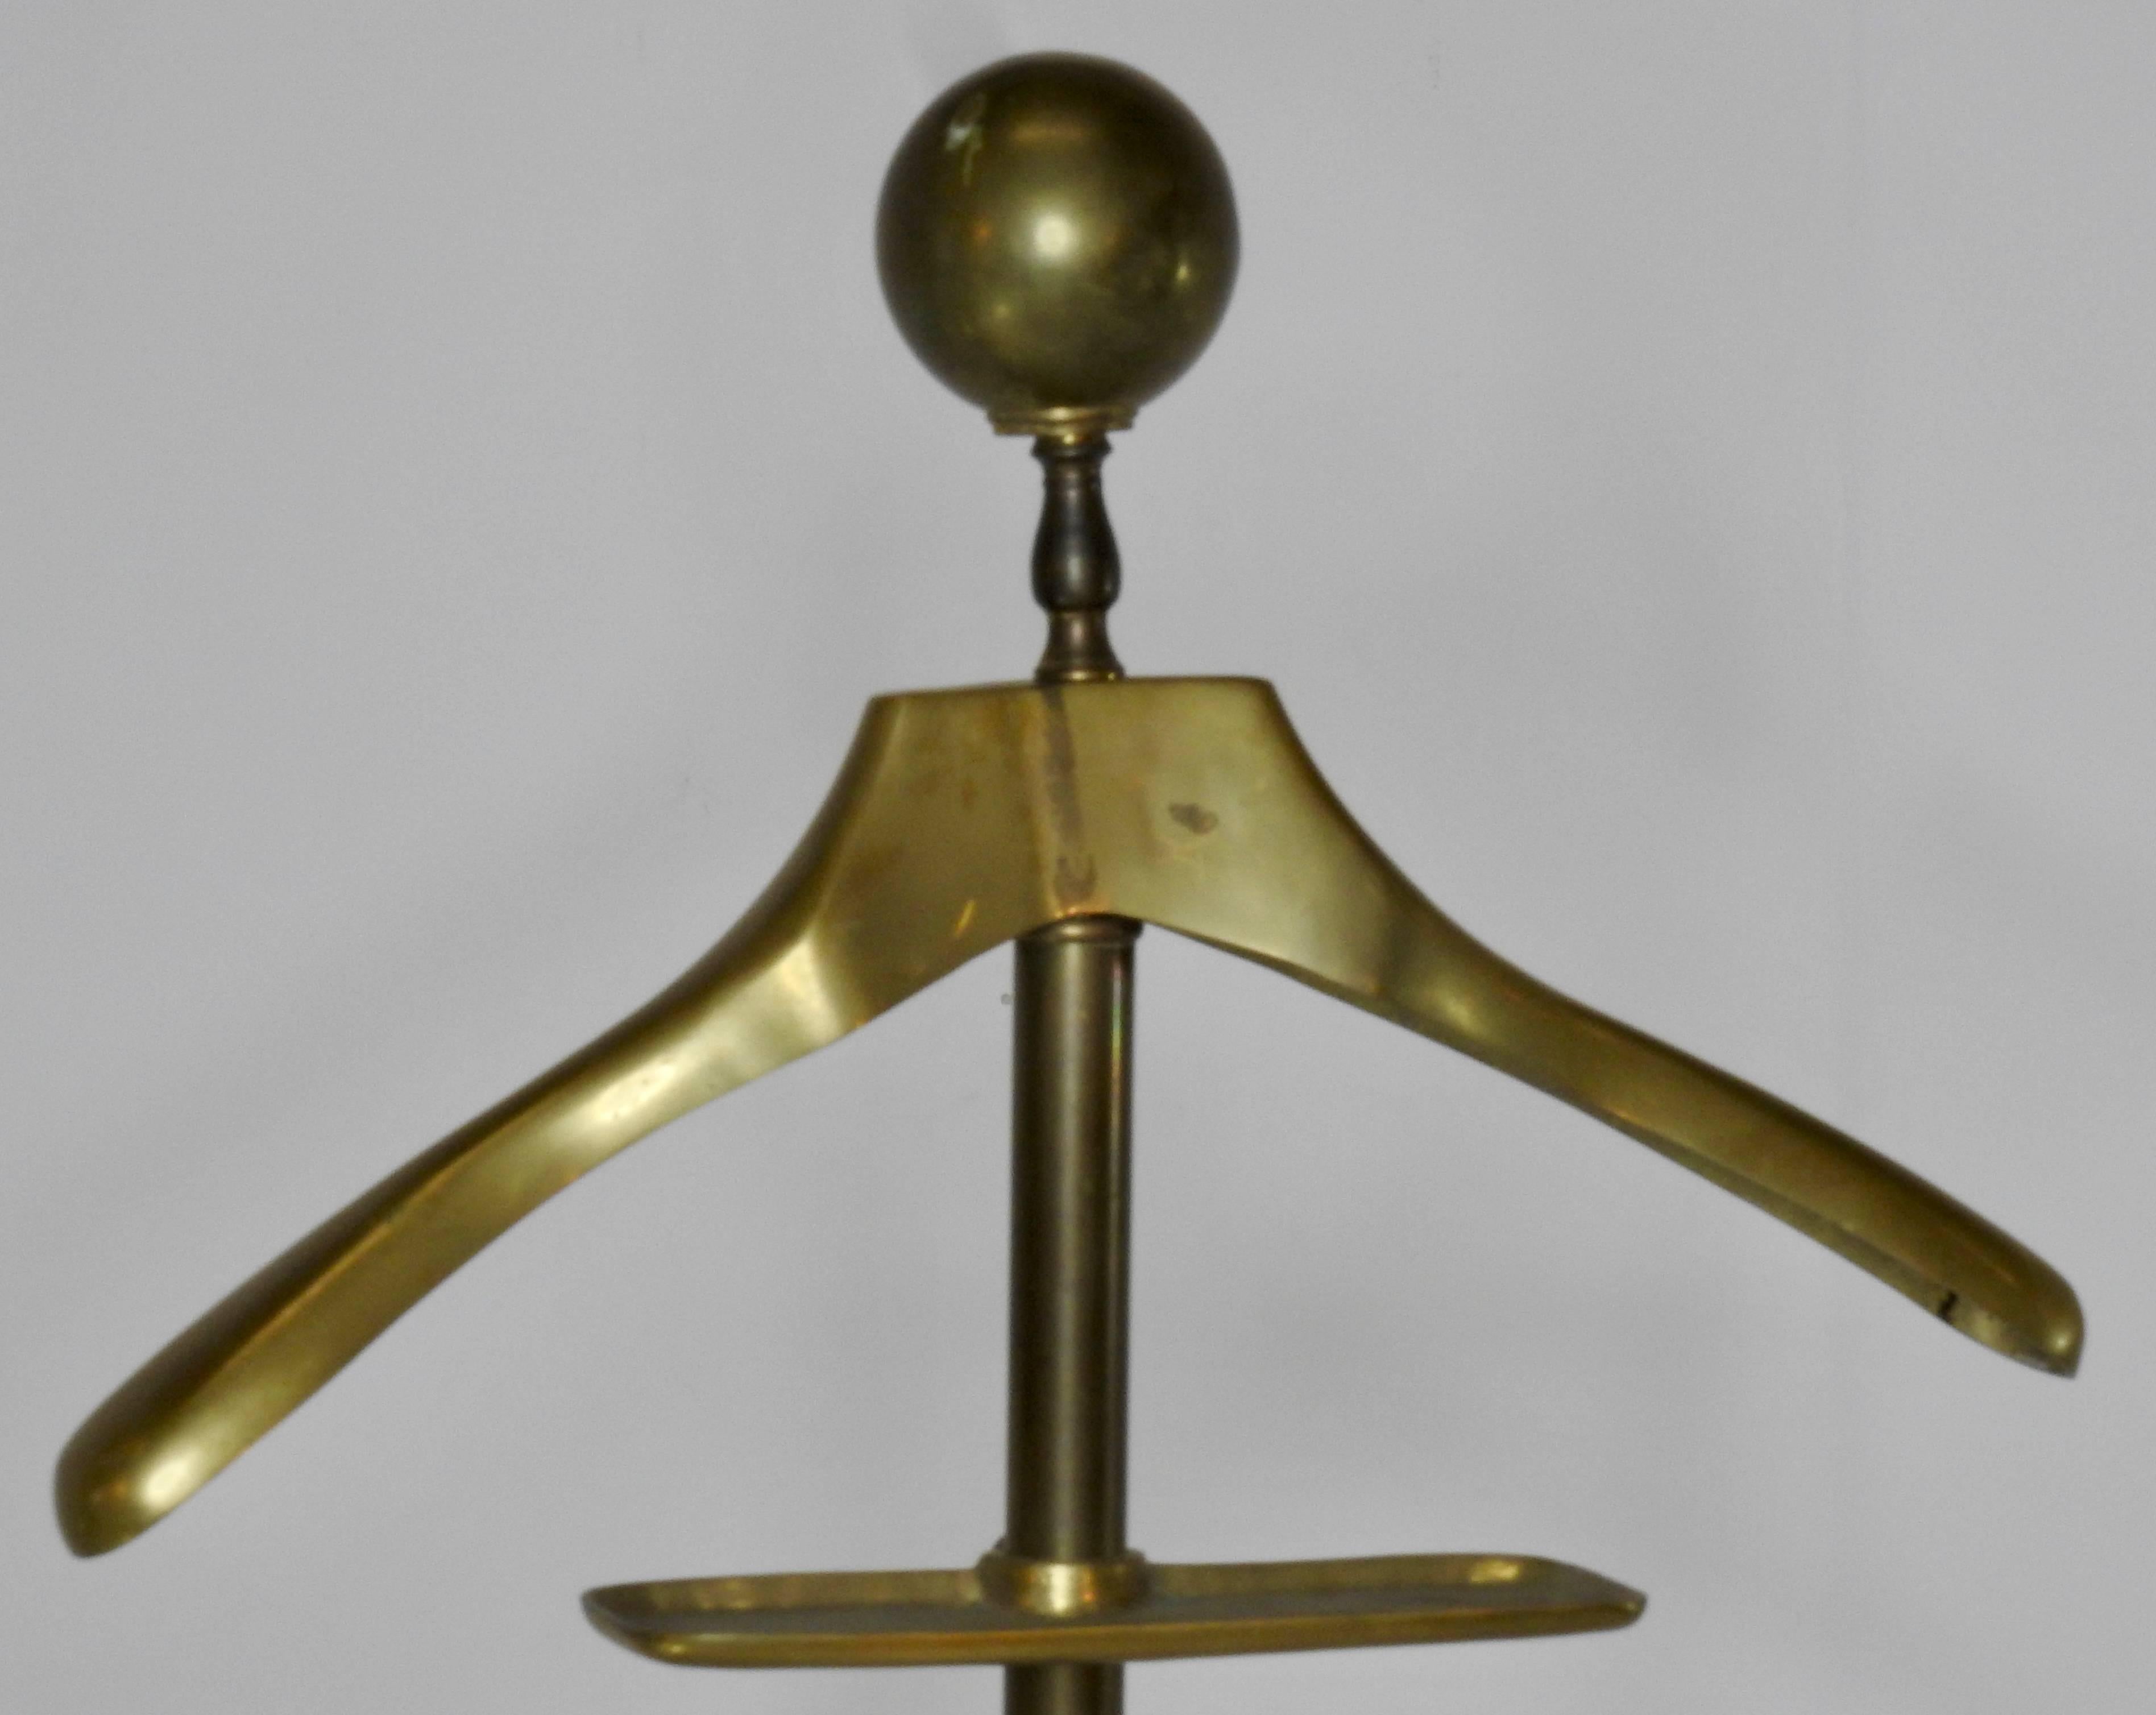 This is a solid brass valet by AITG and features unique twisted scroll legs. It has a hanger for your shirts and jackets as well as a bar for hanging your slacks. It includes a tray for your coins and accessories. Is marked solid brass and AITG INC.